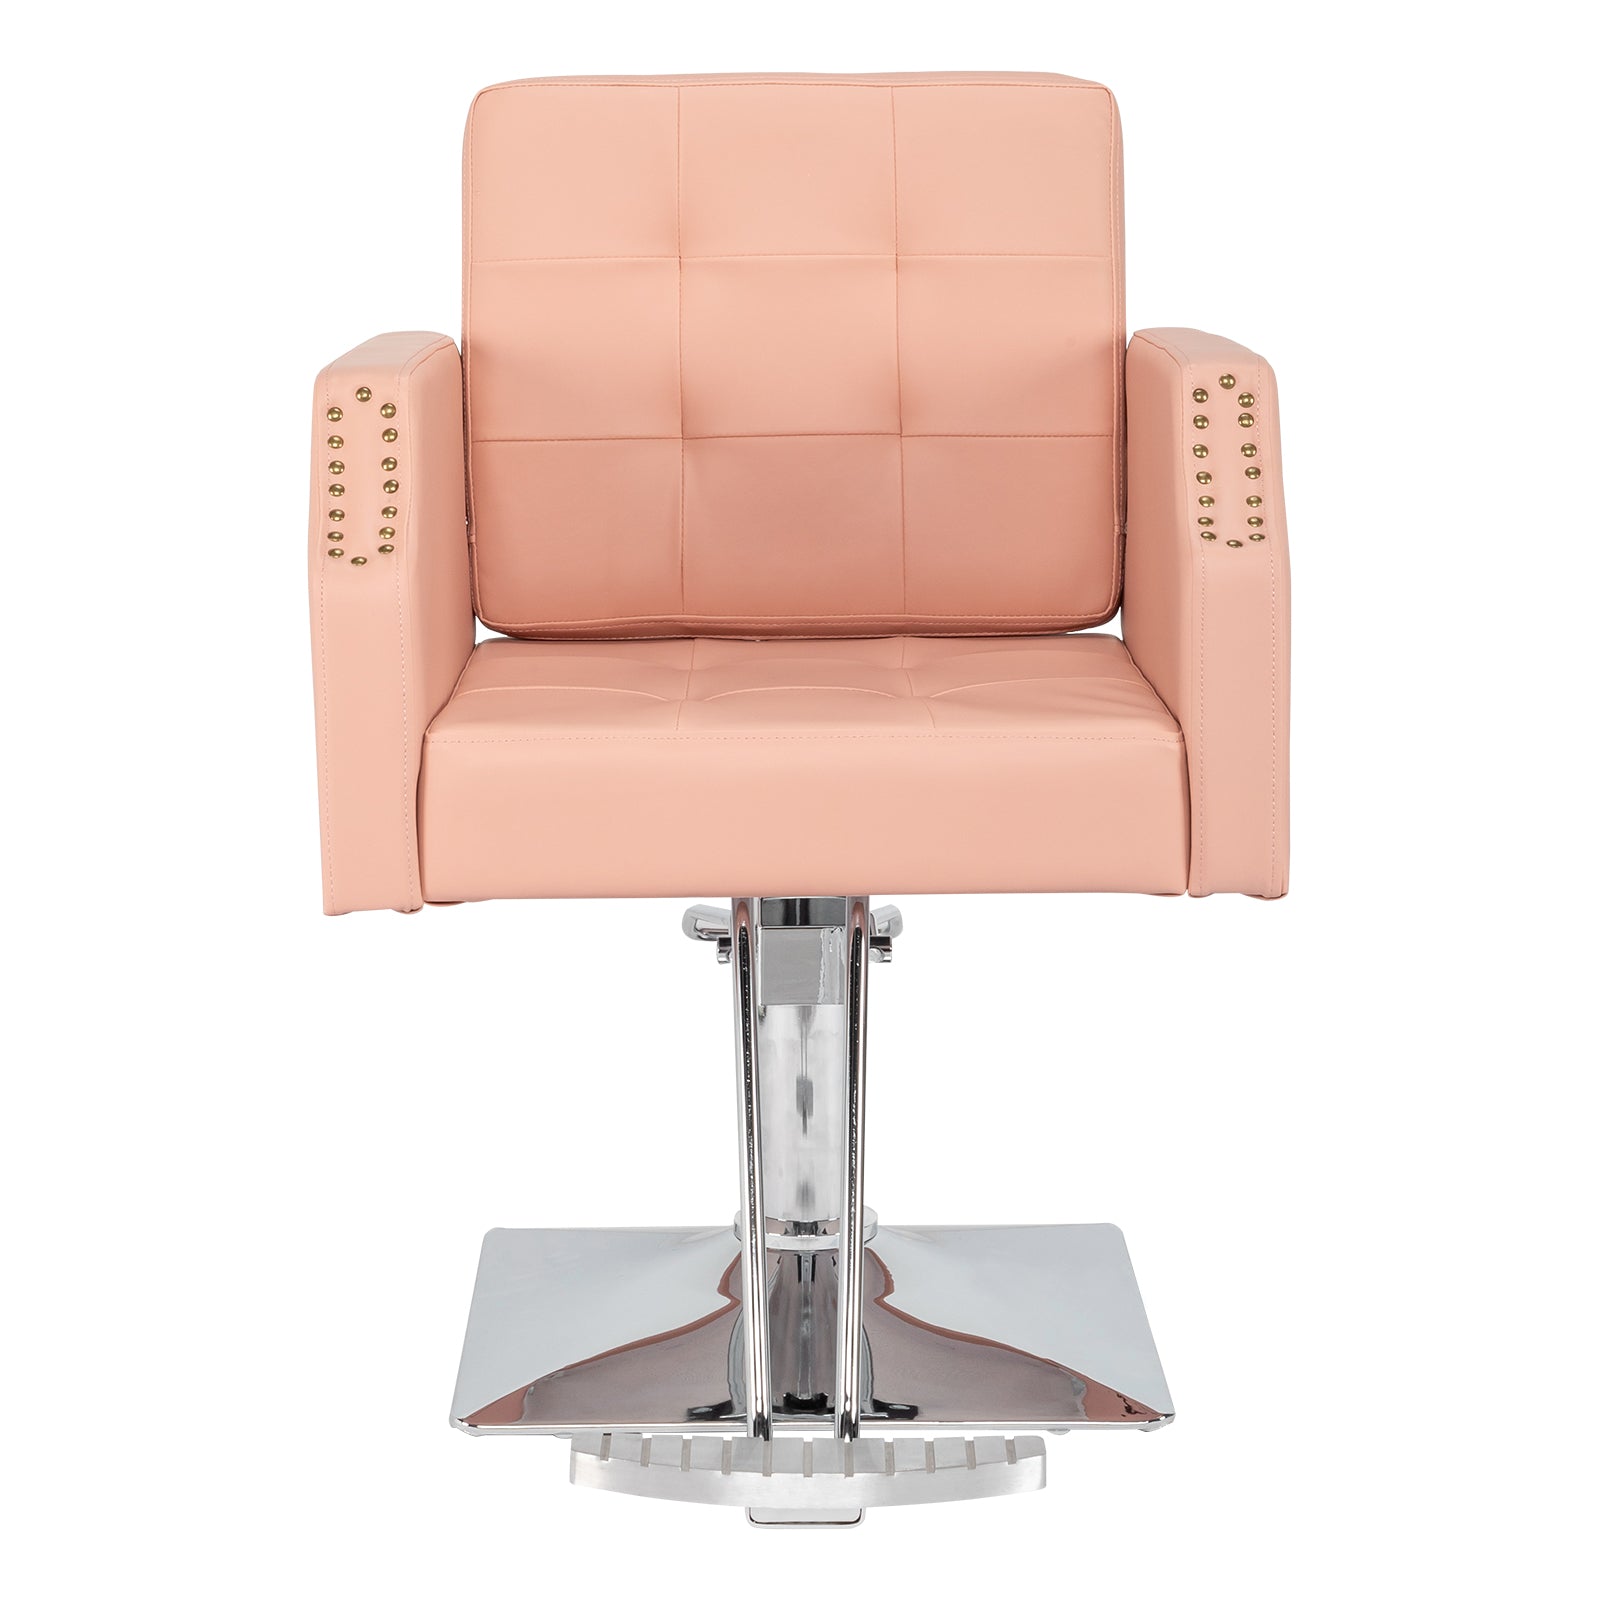 PVC leather aluminum alloy foot pedal rivet type square chassis high oil pump barber chair 150kg pink